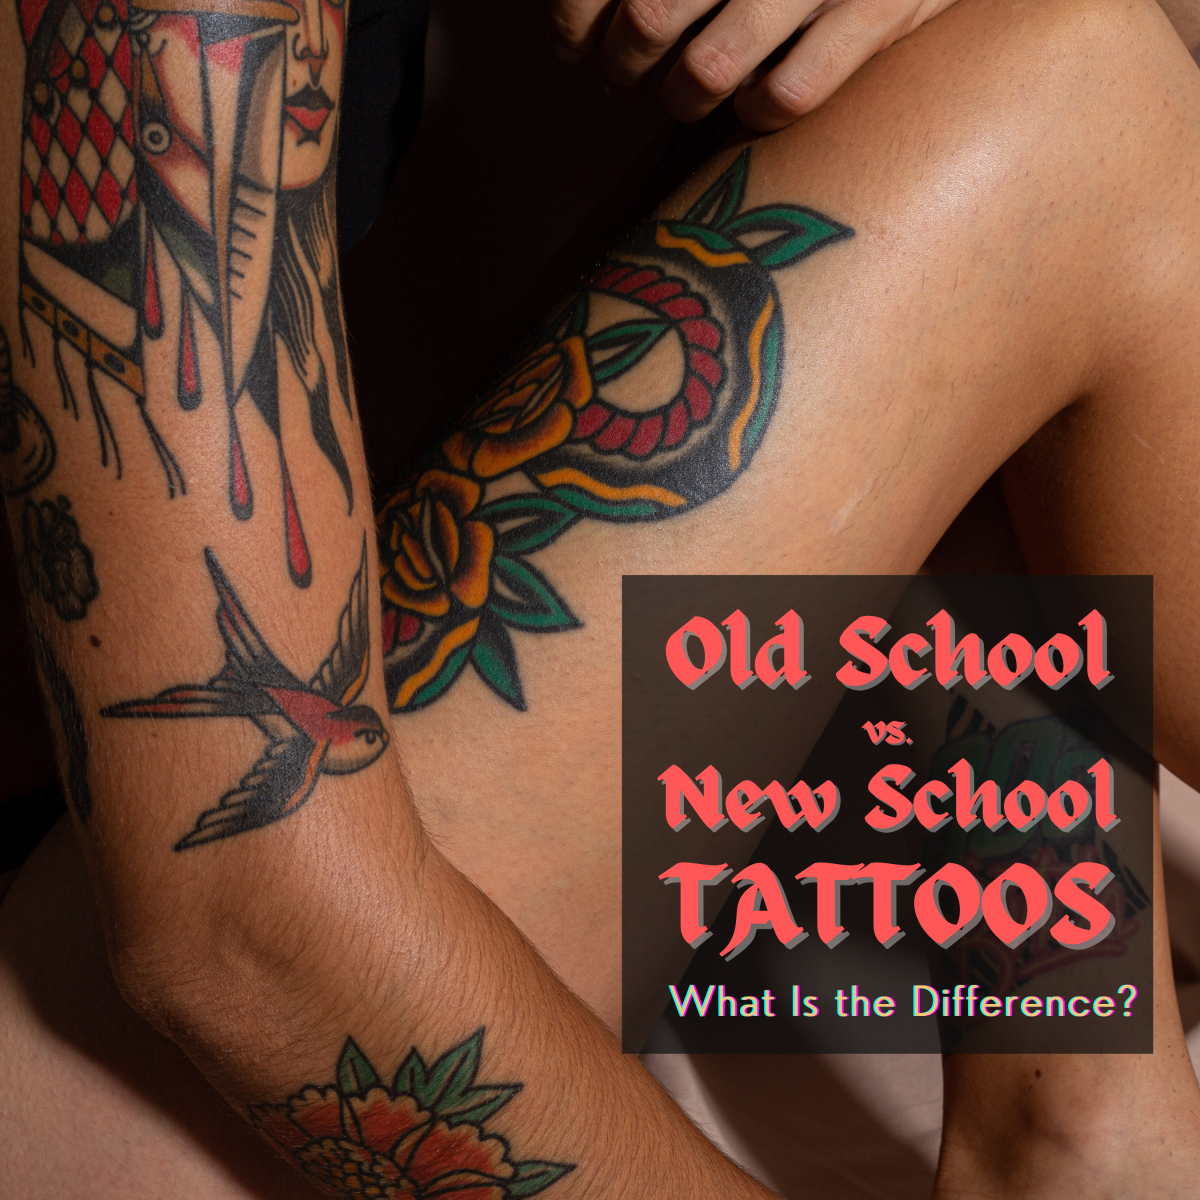 New School vs. Old School Tattoos: What's the Difference?